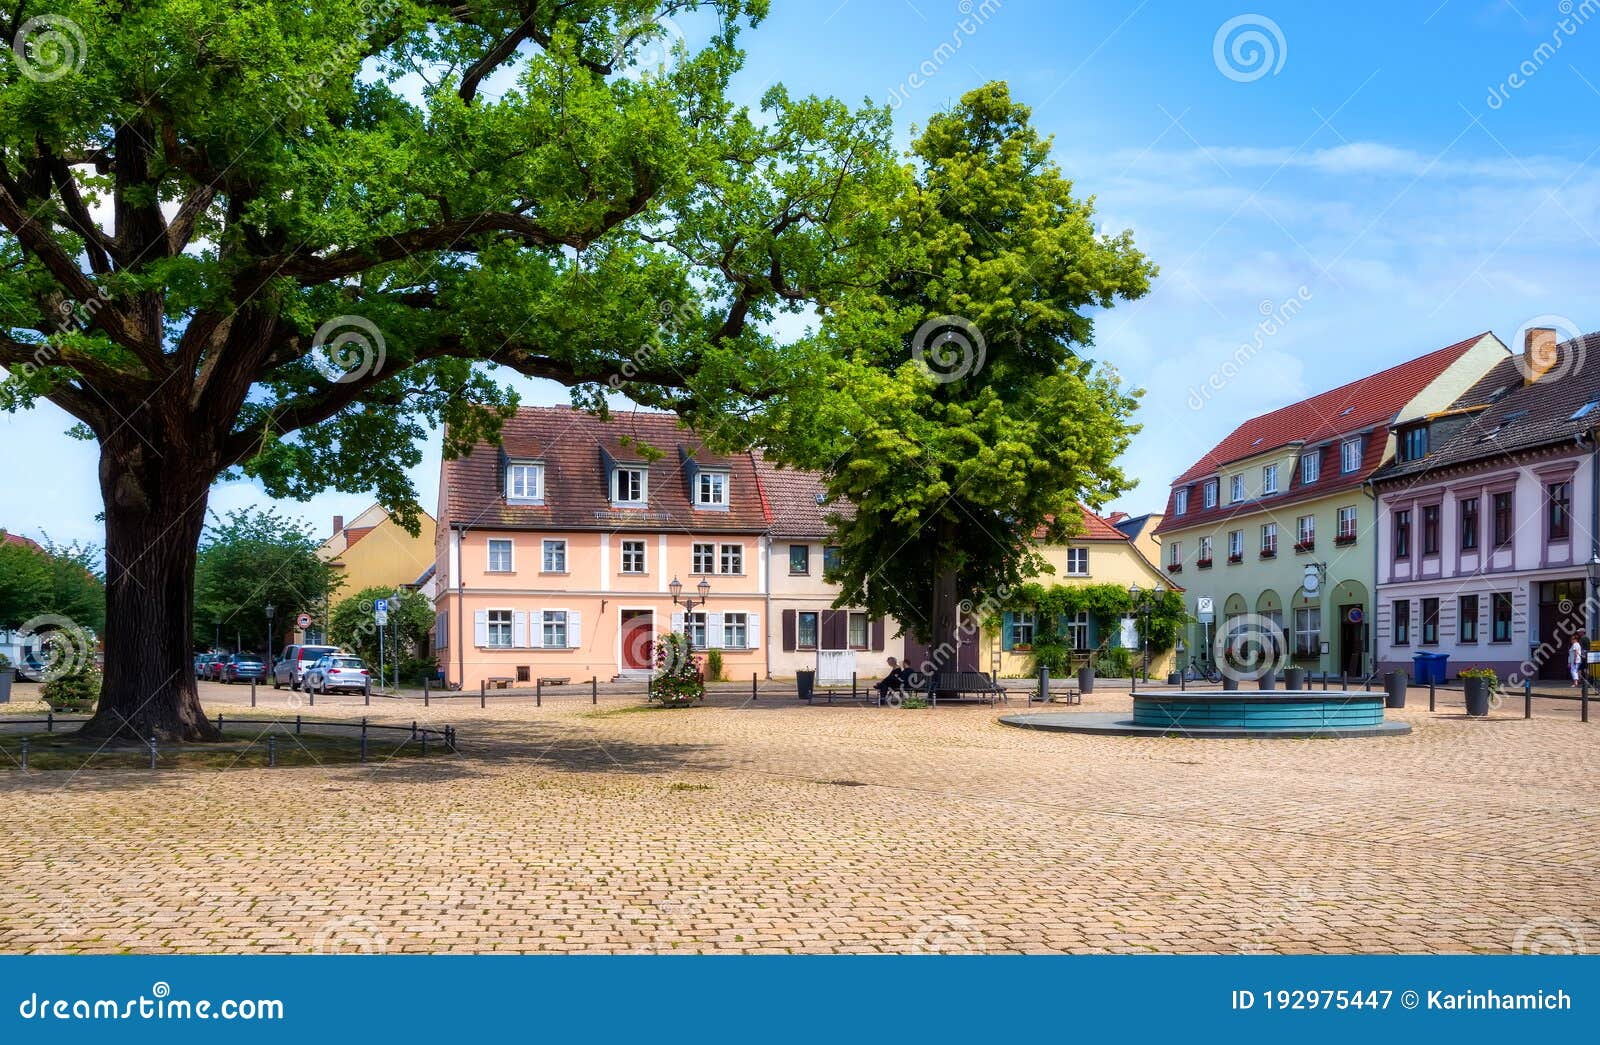 market place in the idyllic city of werder an der havel, potsdam, germany